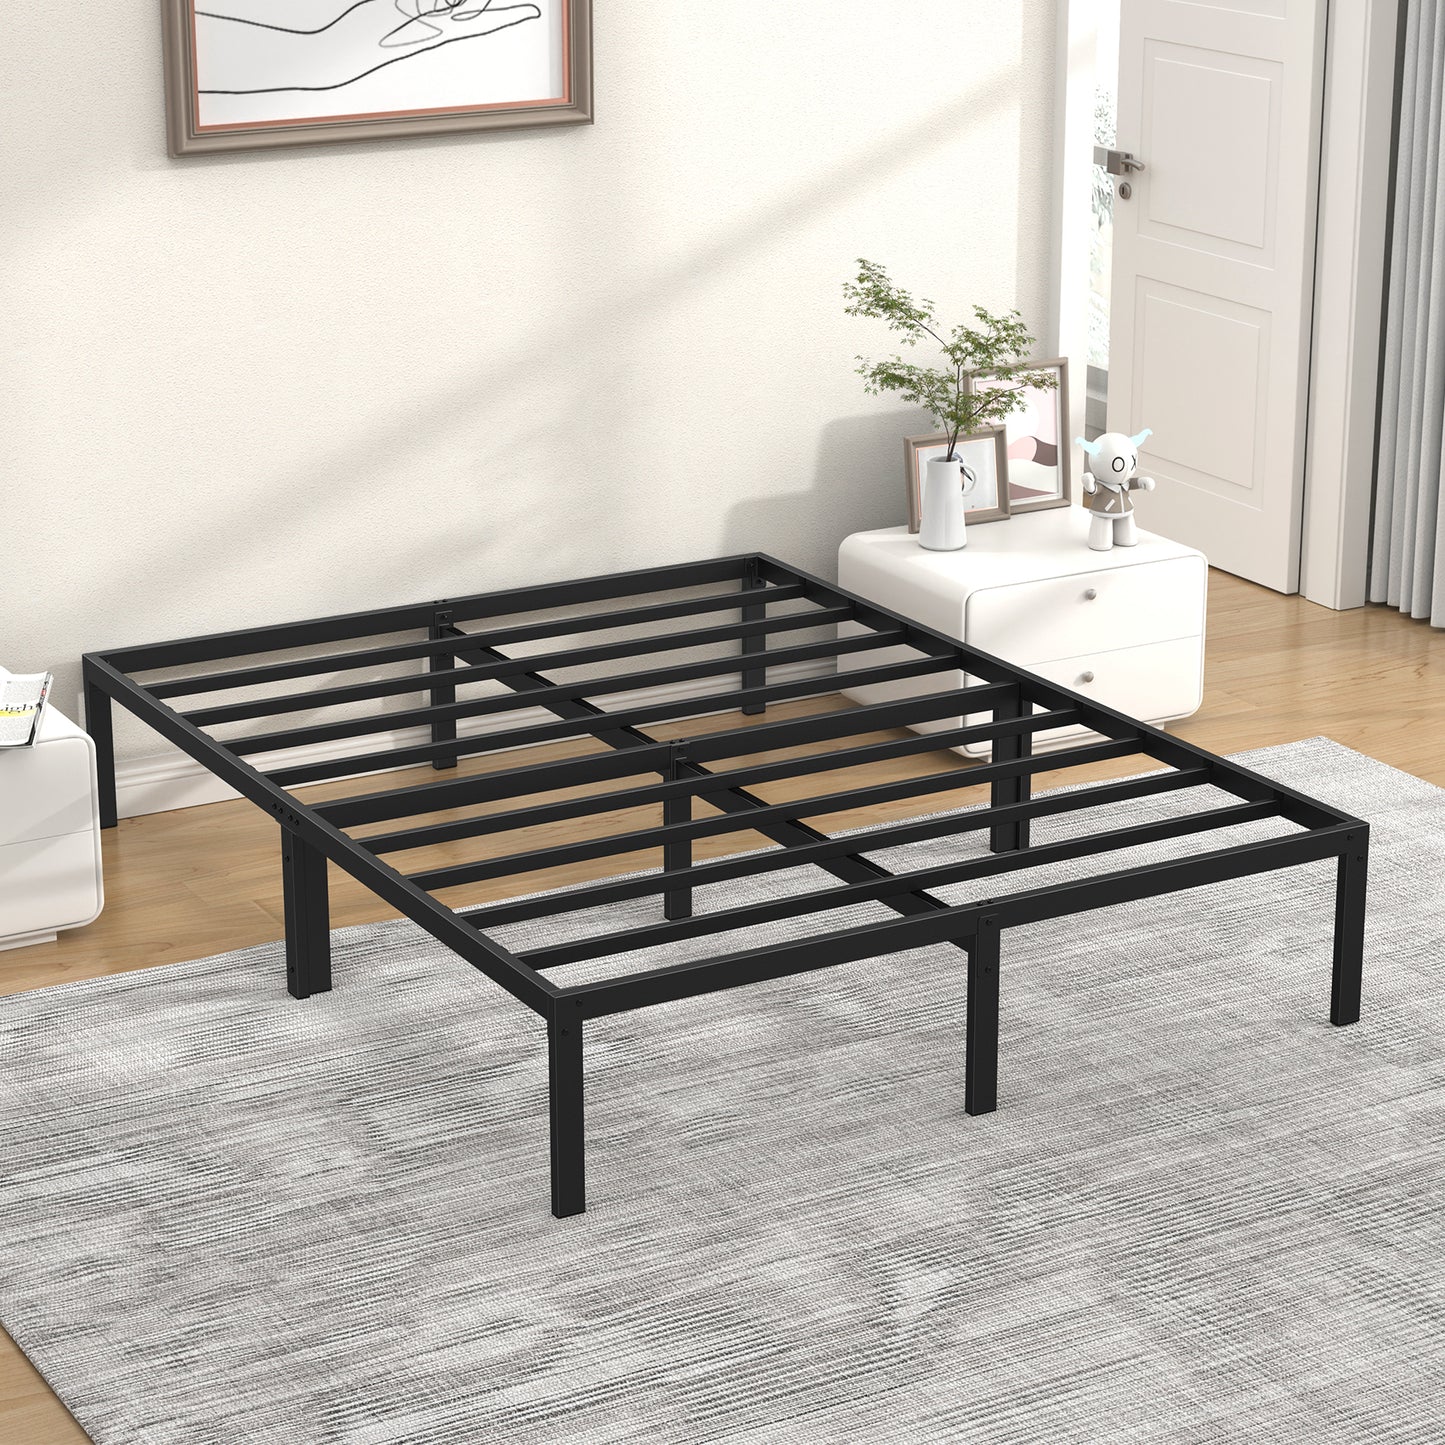 Mr IRONSTONE Queen Bed Frame, Heavy Duty Queen Size Metal Platform Bed Frame, 14" High with Storage, No Box Spring Needed, Black